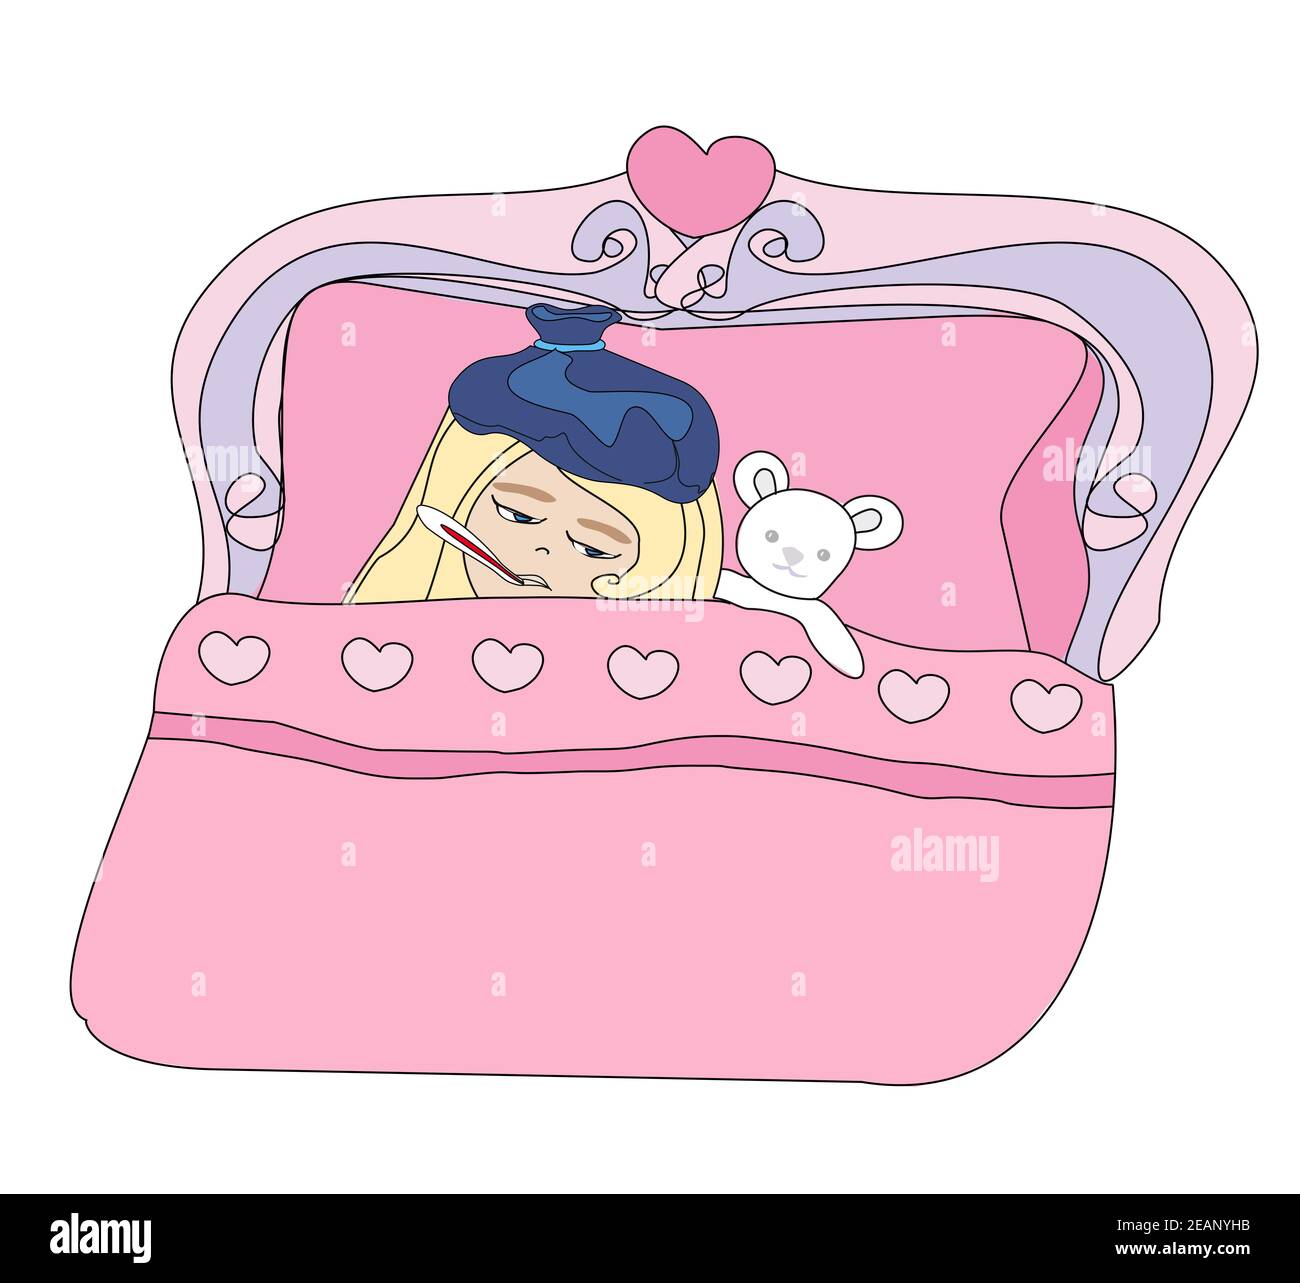 Illustration of a Sick Girl lying in bed Stock Photo